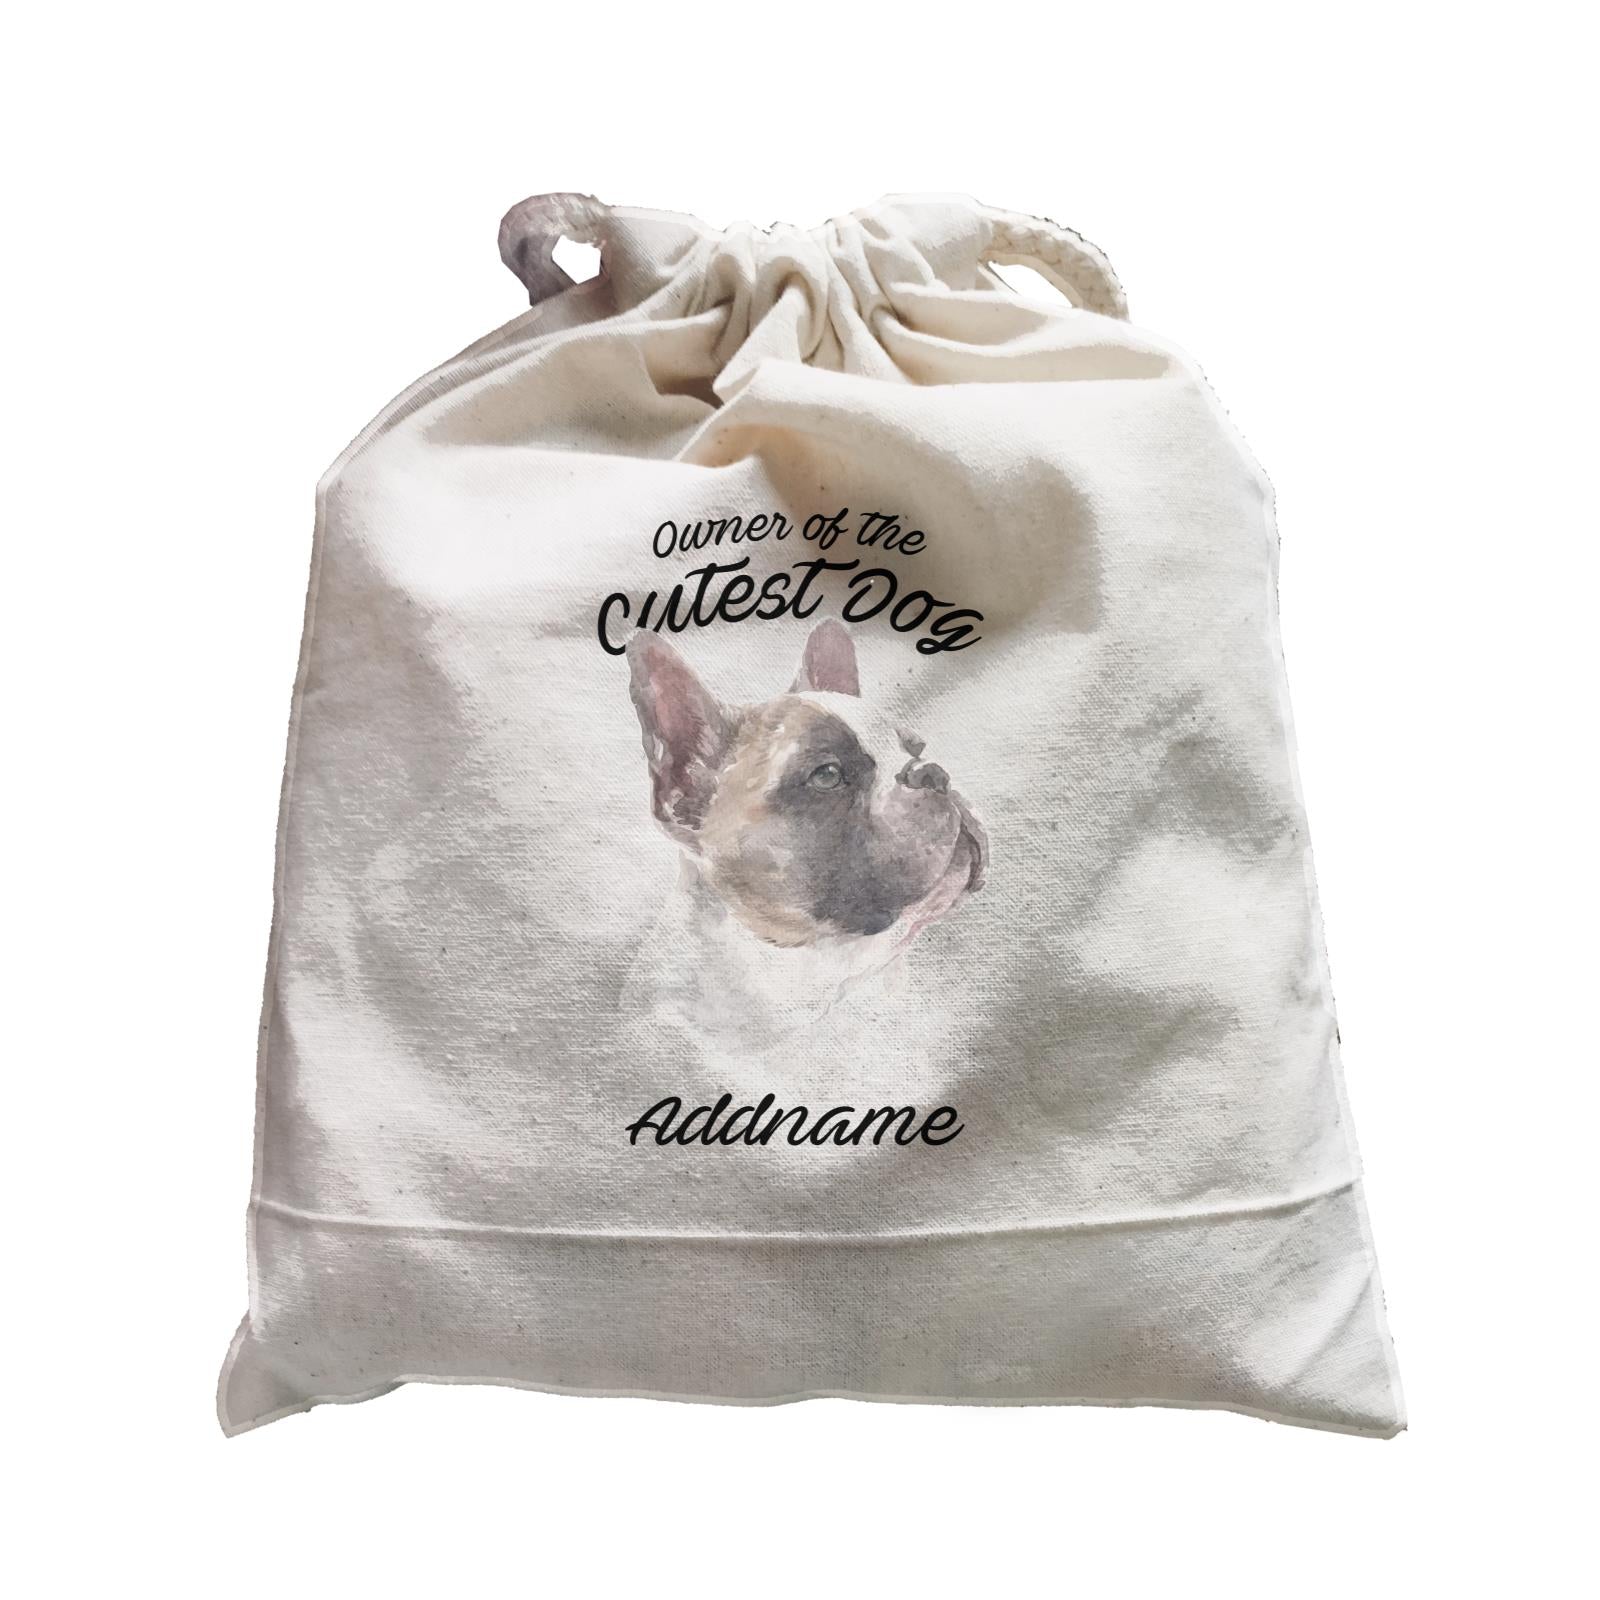 Watercolor Dog Owner Of The Cutest Dog French Bulldog Addname Satchel